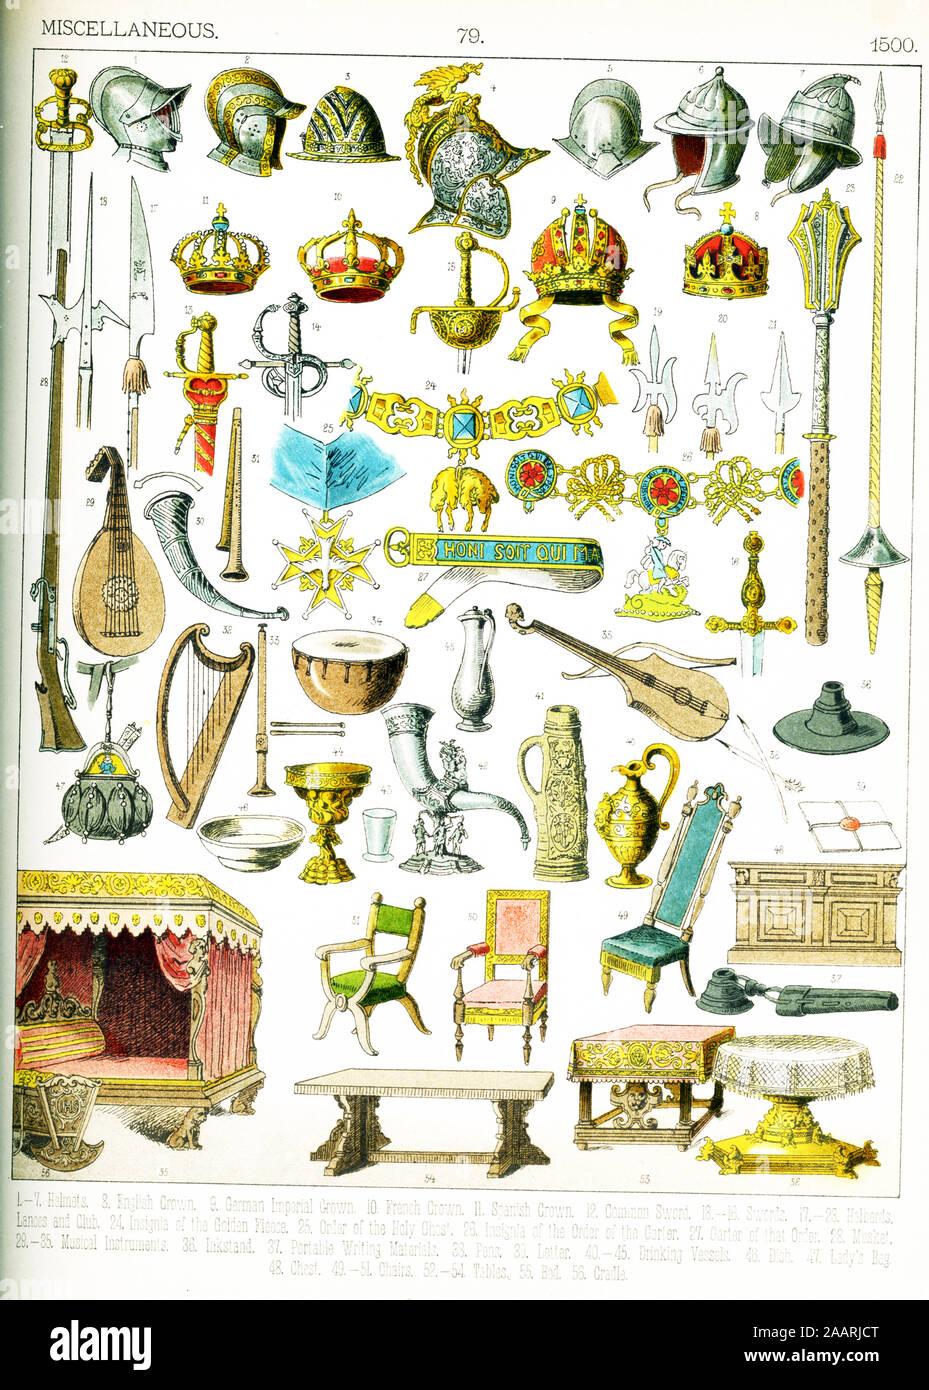 Shown here are European artifacts from approximately the year 1500.They are from left to right, top to bottom: seven helmets, English crown, German Imperial crown, French crown, Spanish crown, common sword, four swords, seven halberds and lances and a club, insignia of the Golden Fleece, Order of the Holy Ghost, Insignia of the Order of the Garter, Garter of that Order, musket, seven musical instruments, inkstand, portable writing materials, pens, letter, six drinking vessels, dish, lady’s bag, chest, three chairs, three tables, bed, cradle. The illustration dates to 1882. Stock Photo